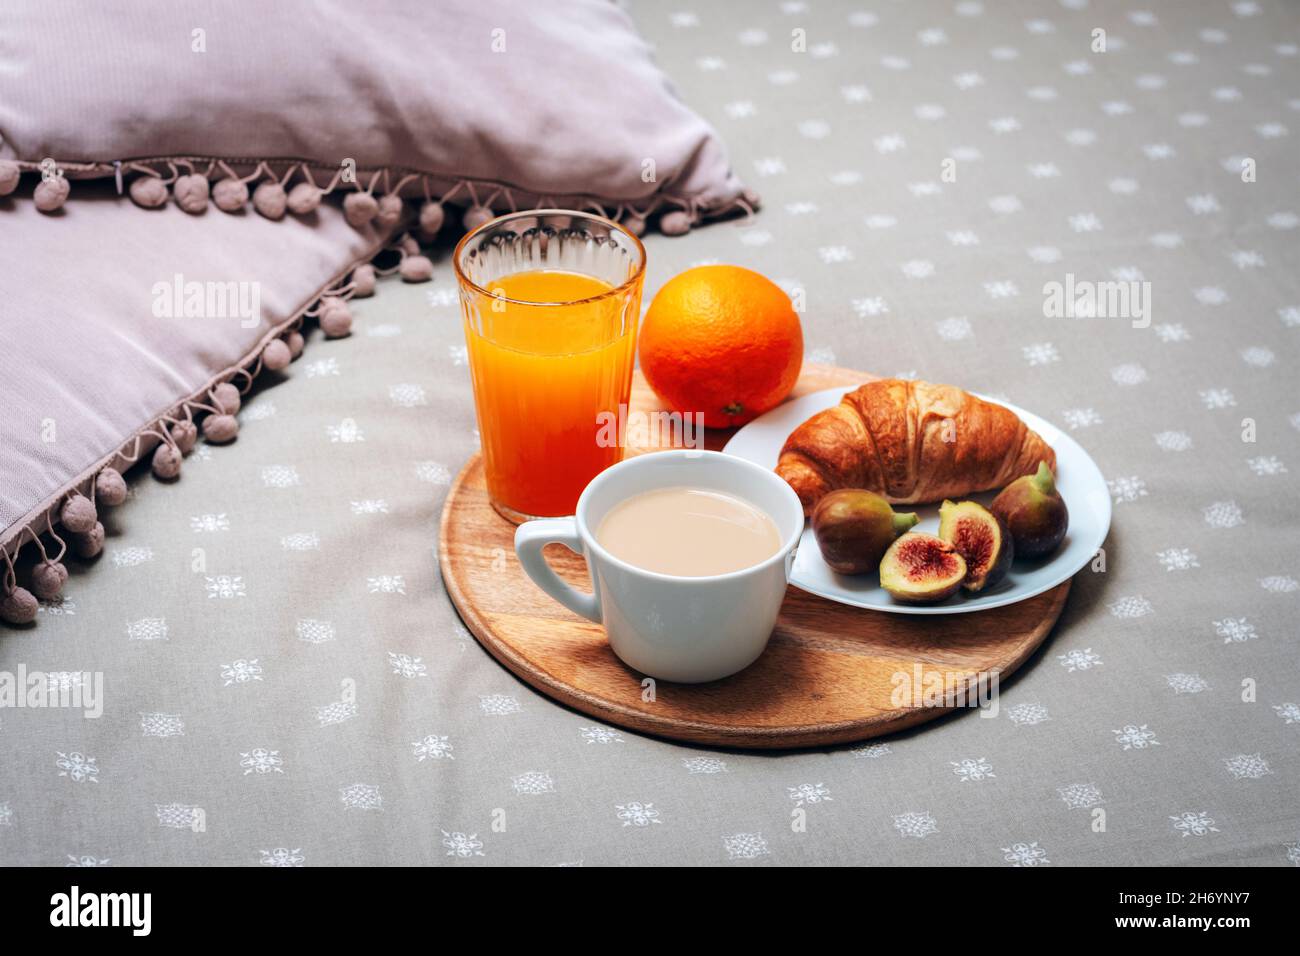 Breakfast in bed. Croissant and figs on a plate, a coffee cup, orange juice and an orange on a tray. Close up. Stock Photo